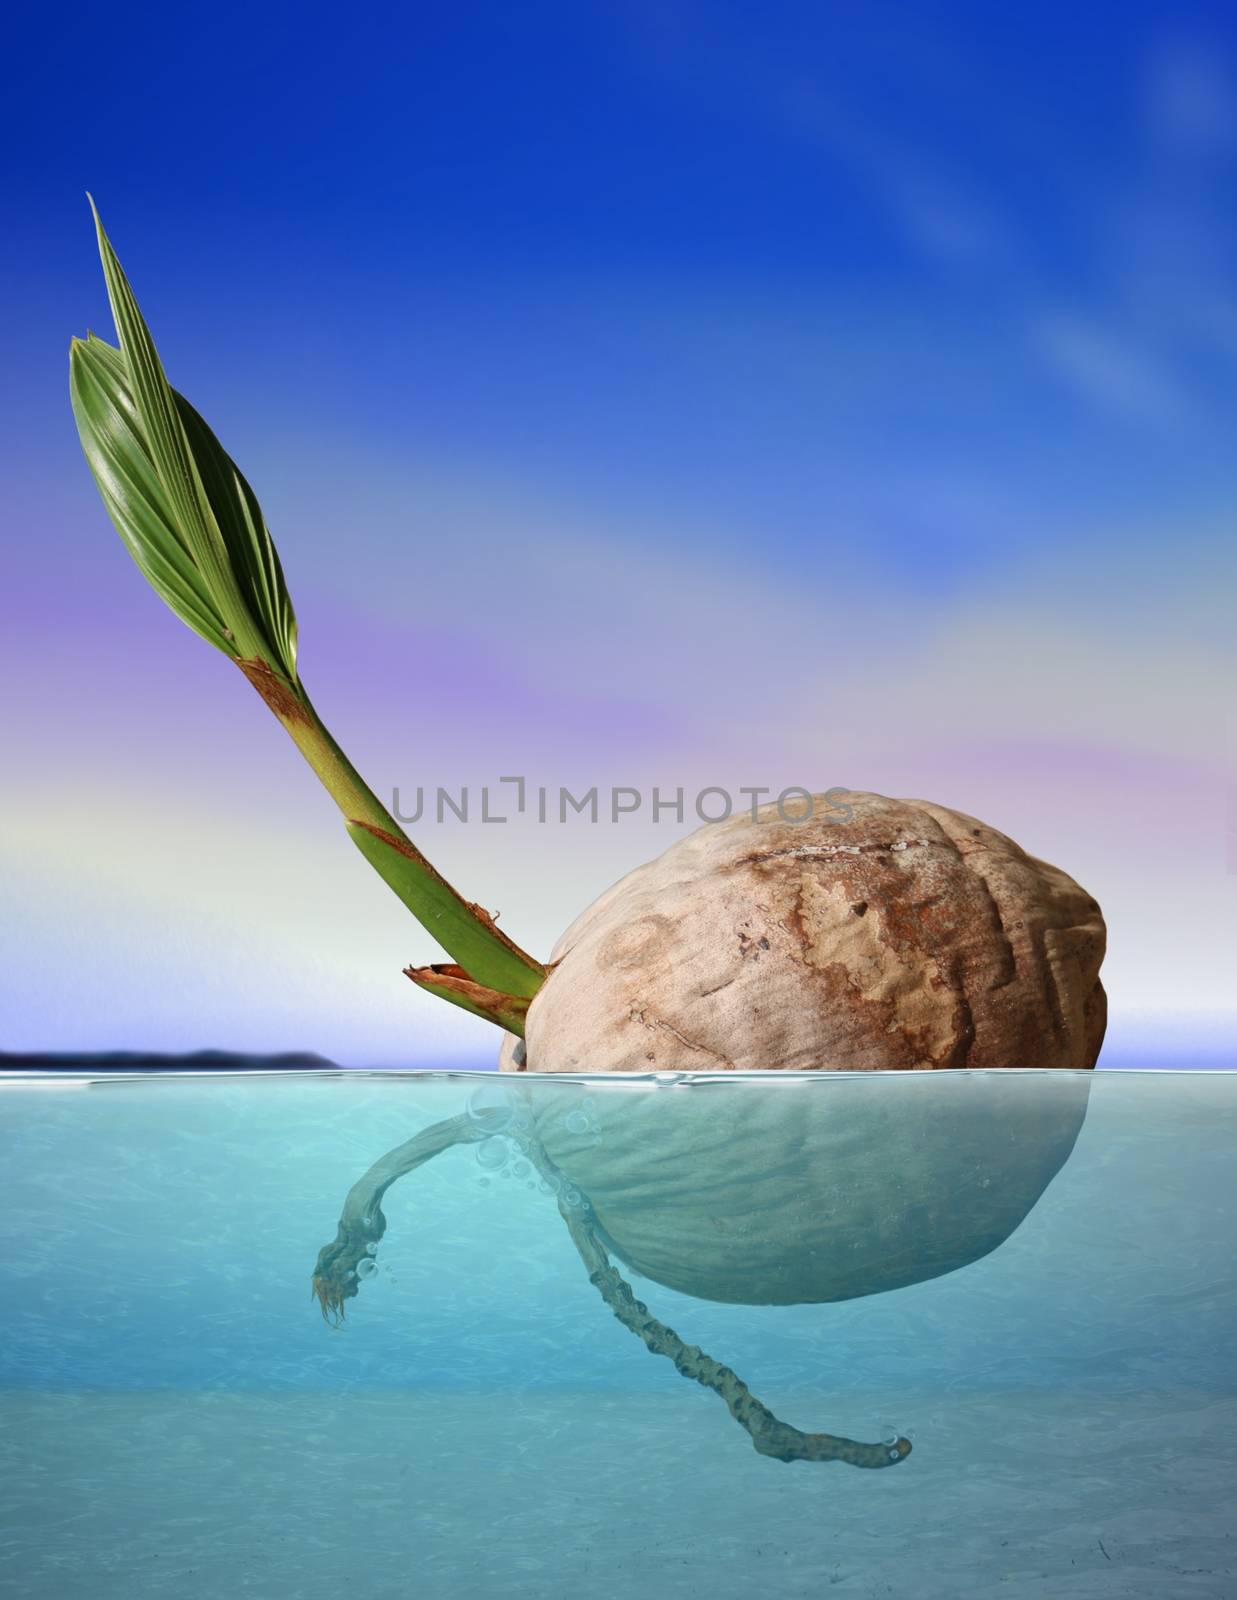 Coconut seed drifting at sea under blue sky by razihusin